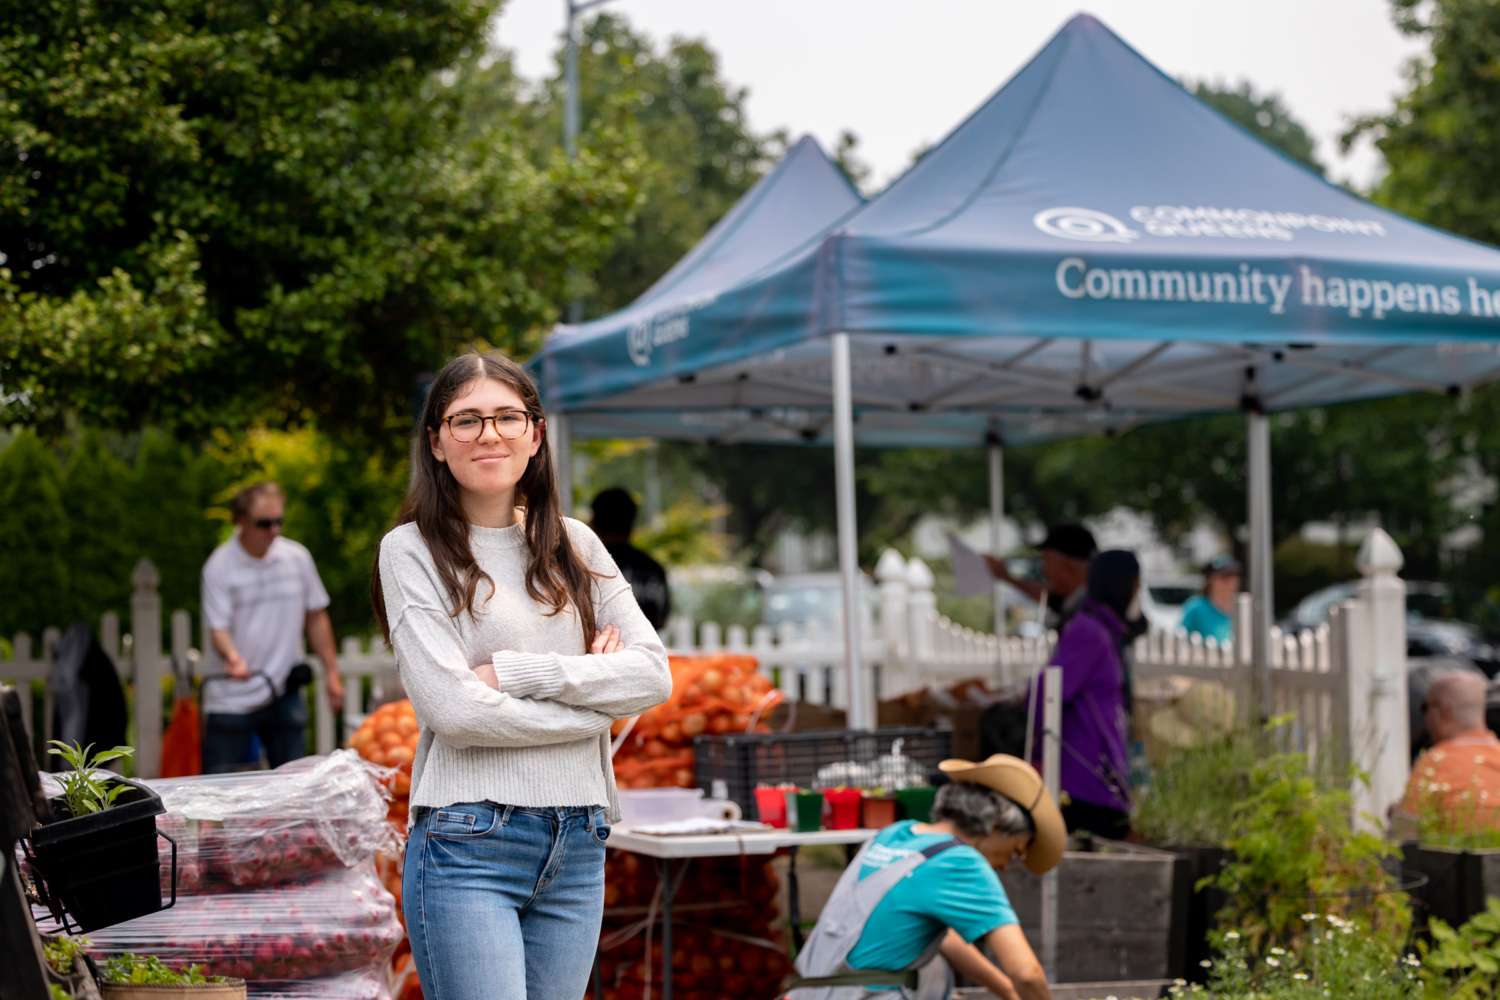 Sydney Hankin poses outside a booth at a farmer's market.